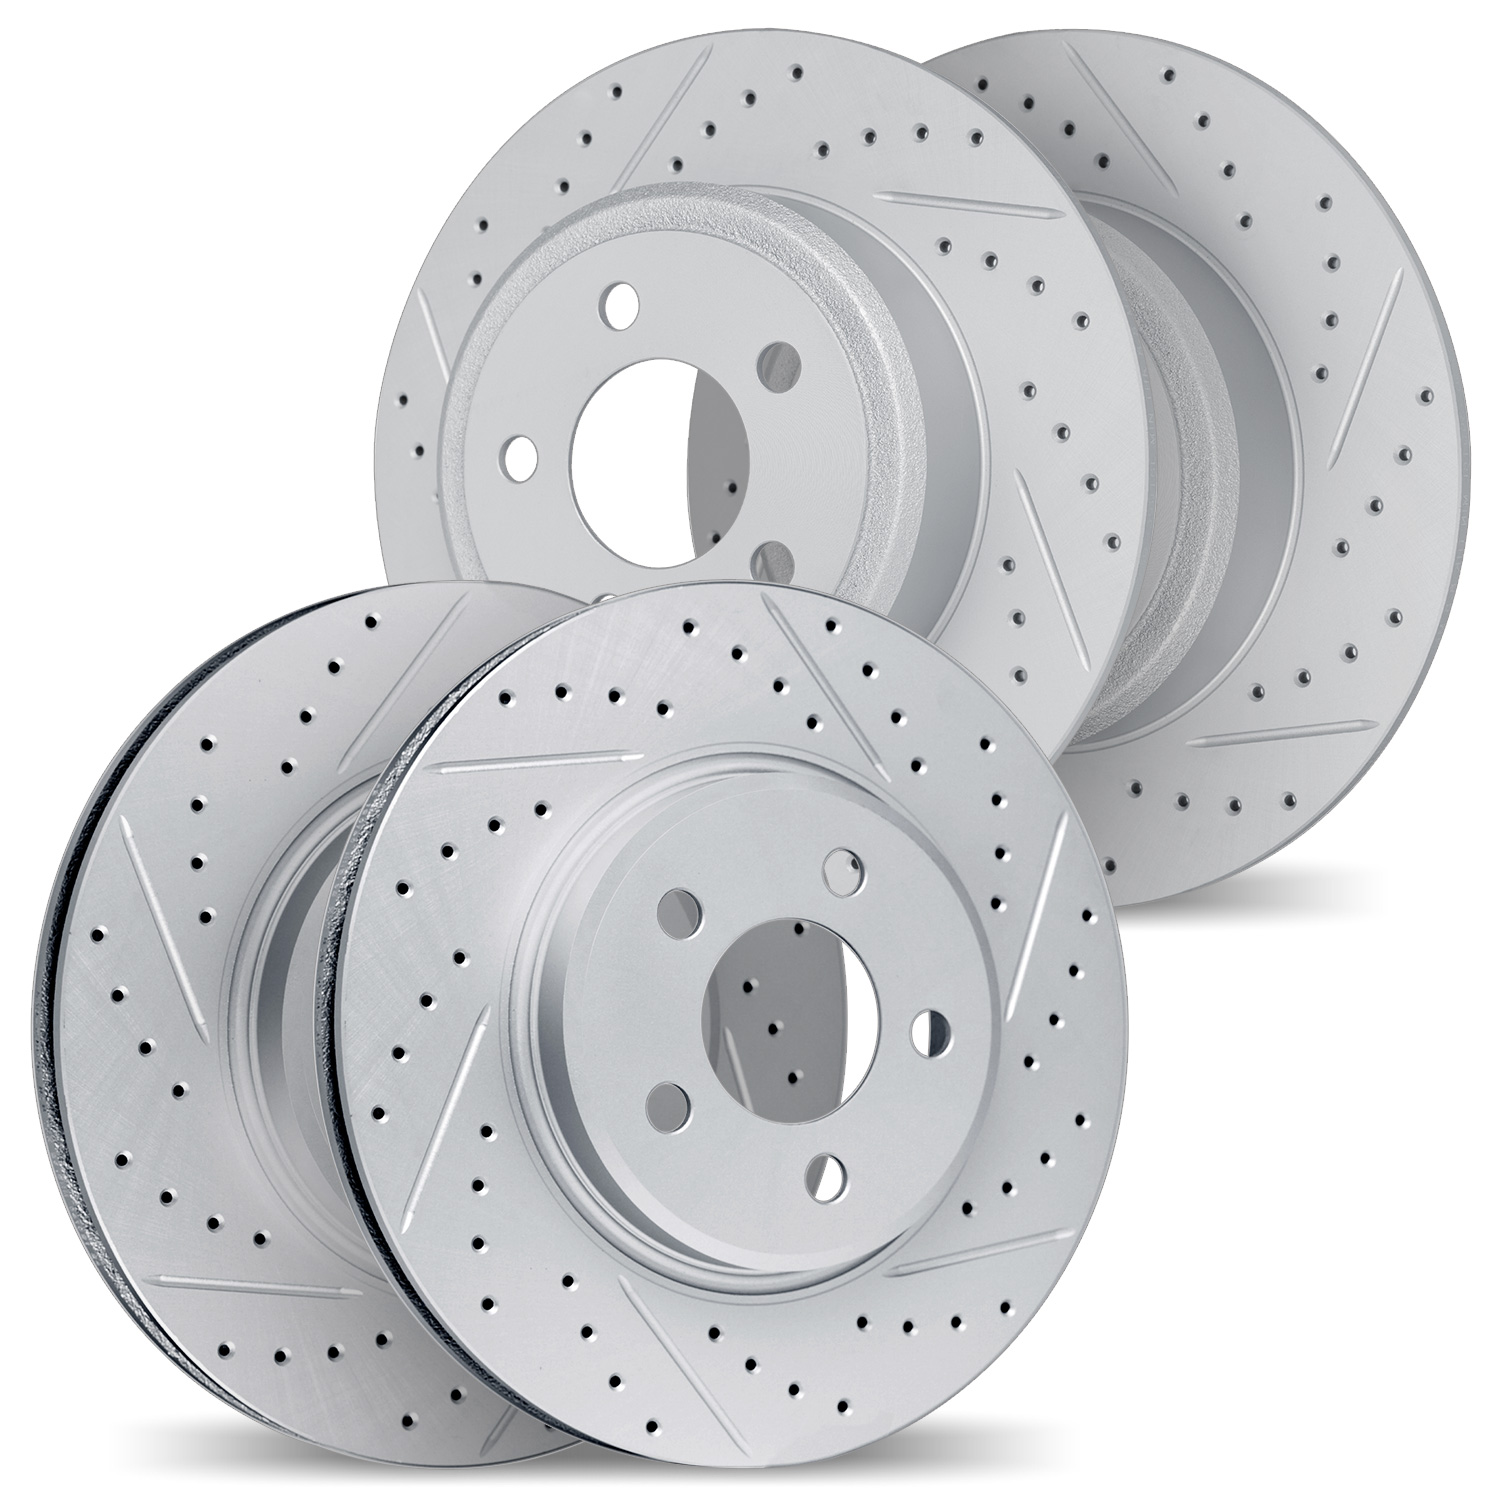 2004-11021 Geoperformance Drilled/Slotted Brake Rotors, 2012-2015 Land Rover, Position: Front and Rear